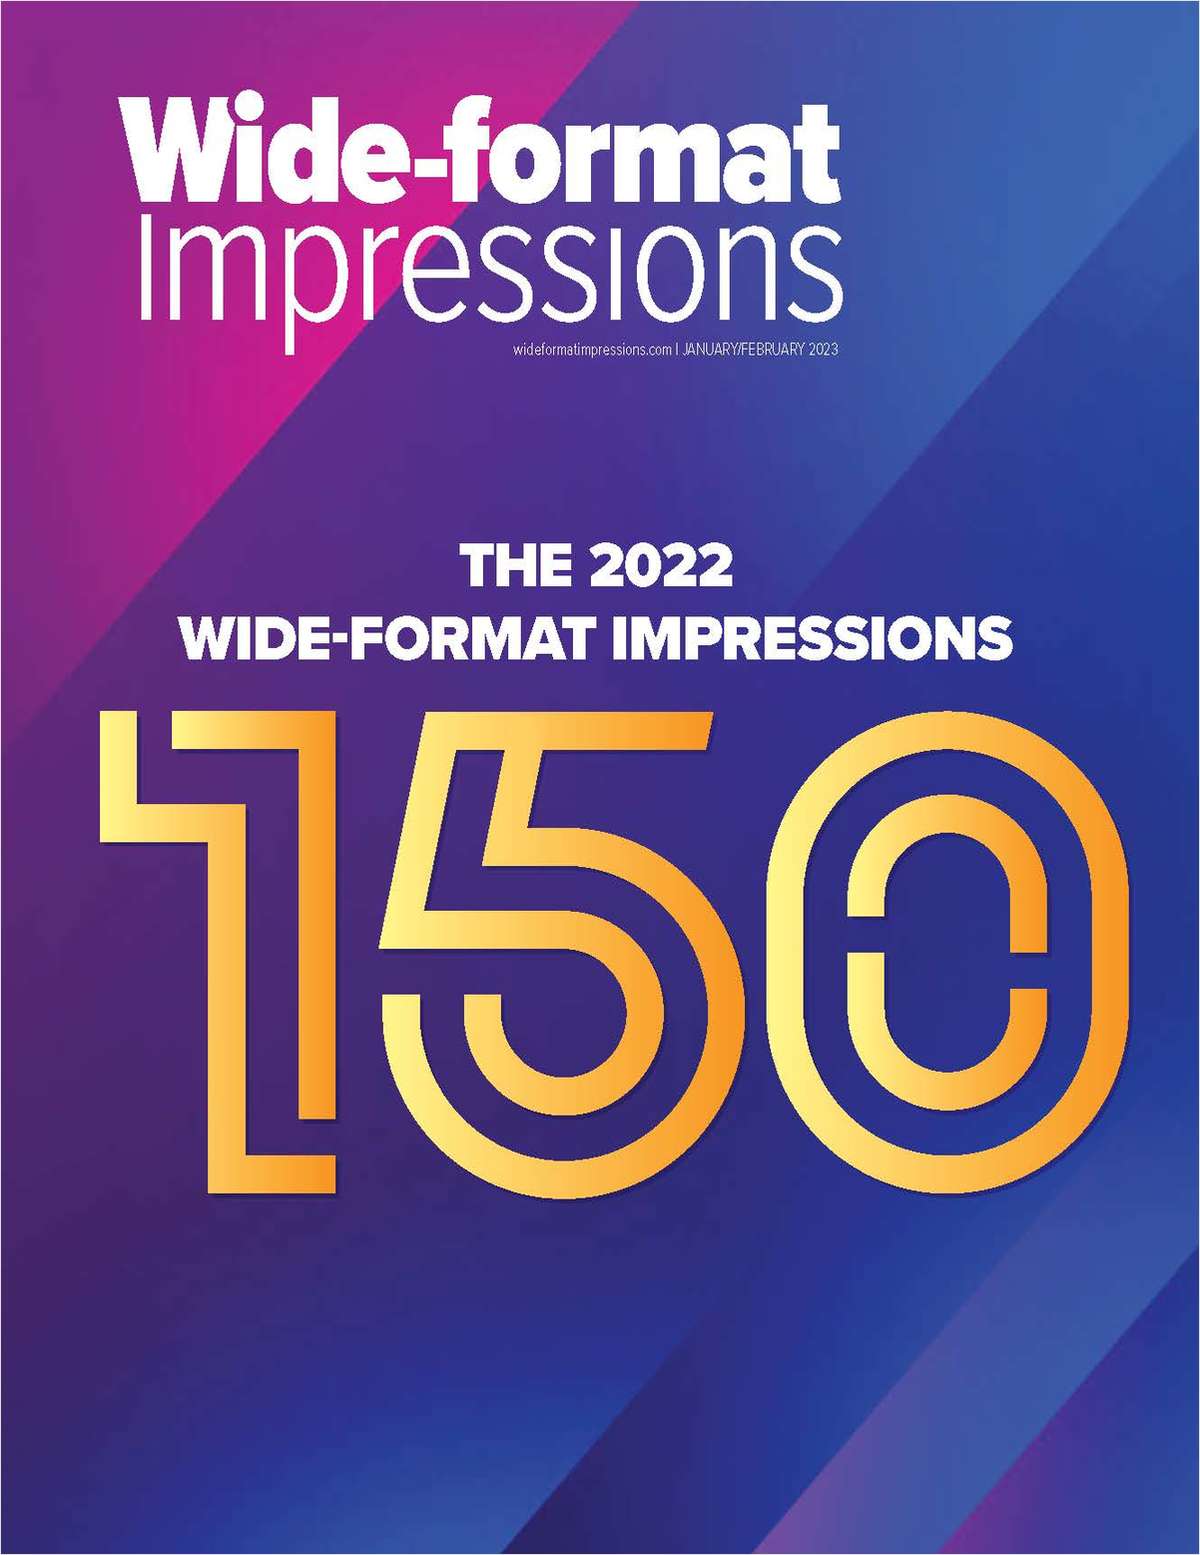 The 2022 Wide-format Impressions 150 Rankings